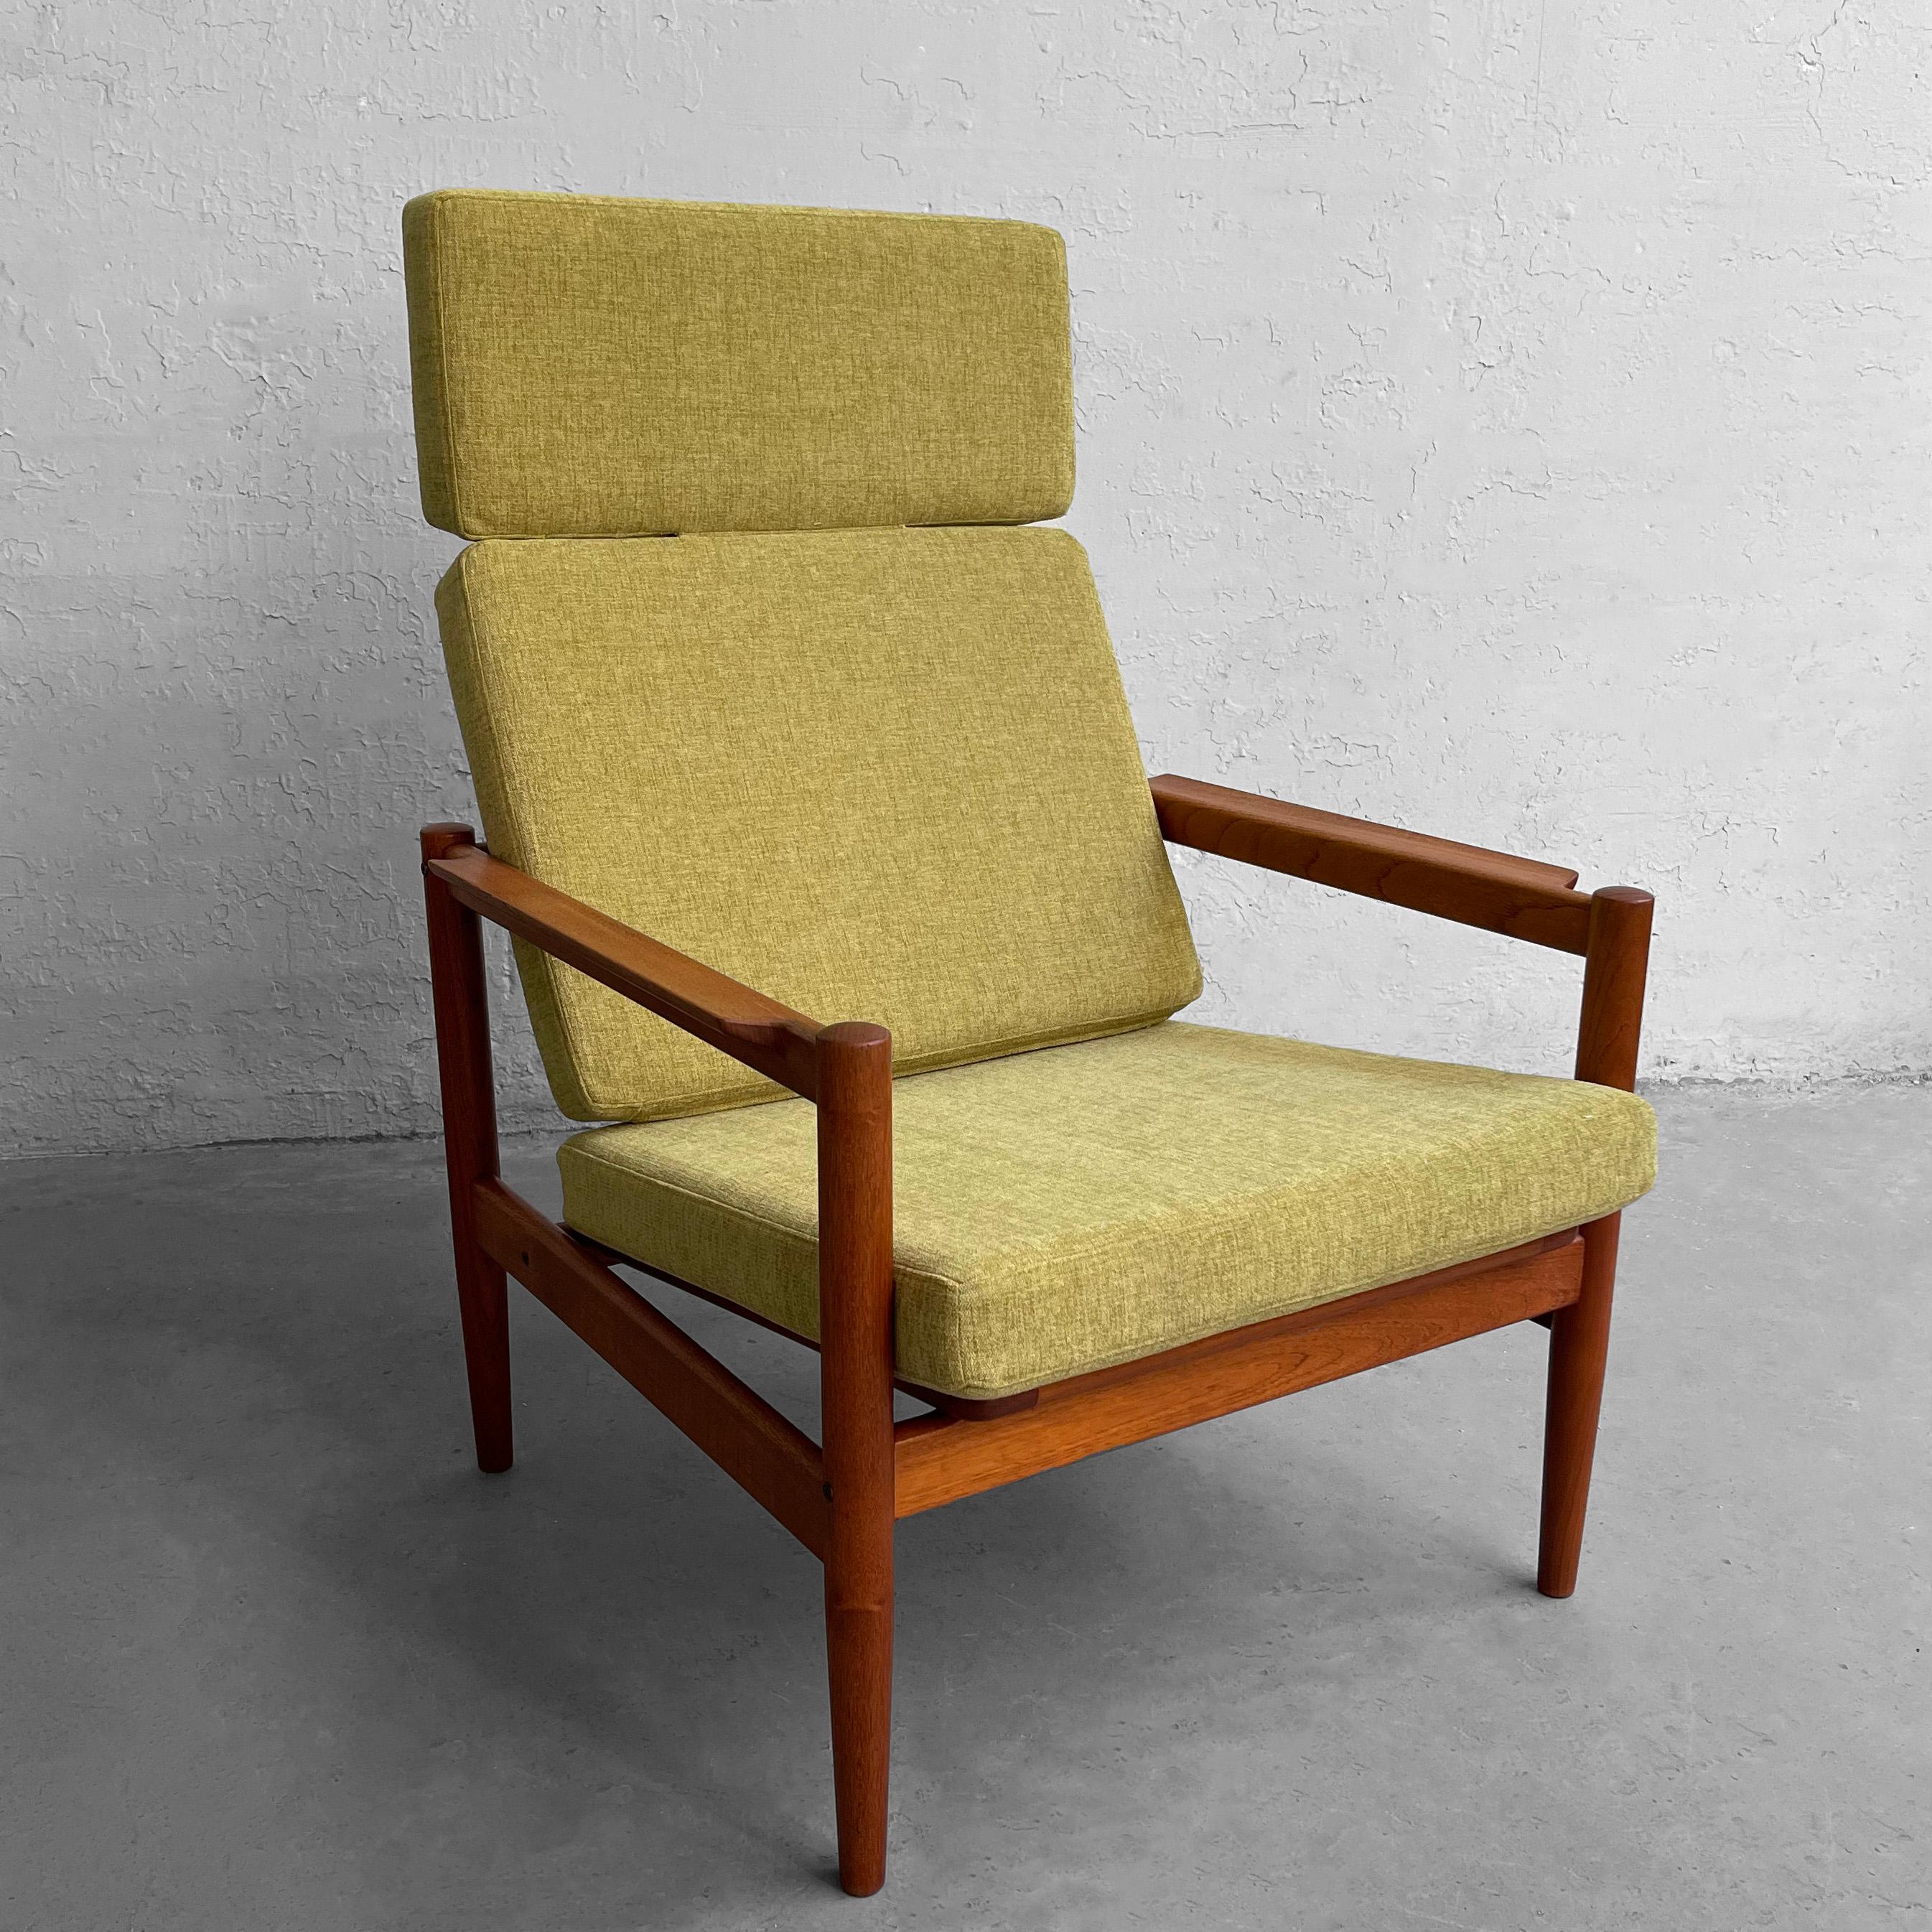 Danish modern, high back, lounge chair by Borge Jensen, Borge Jensen & Sonner features a teak frame with slat back and newly upholstered, segmented cushions in chartreuse chenille.